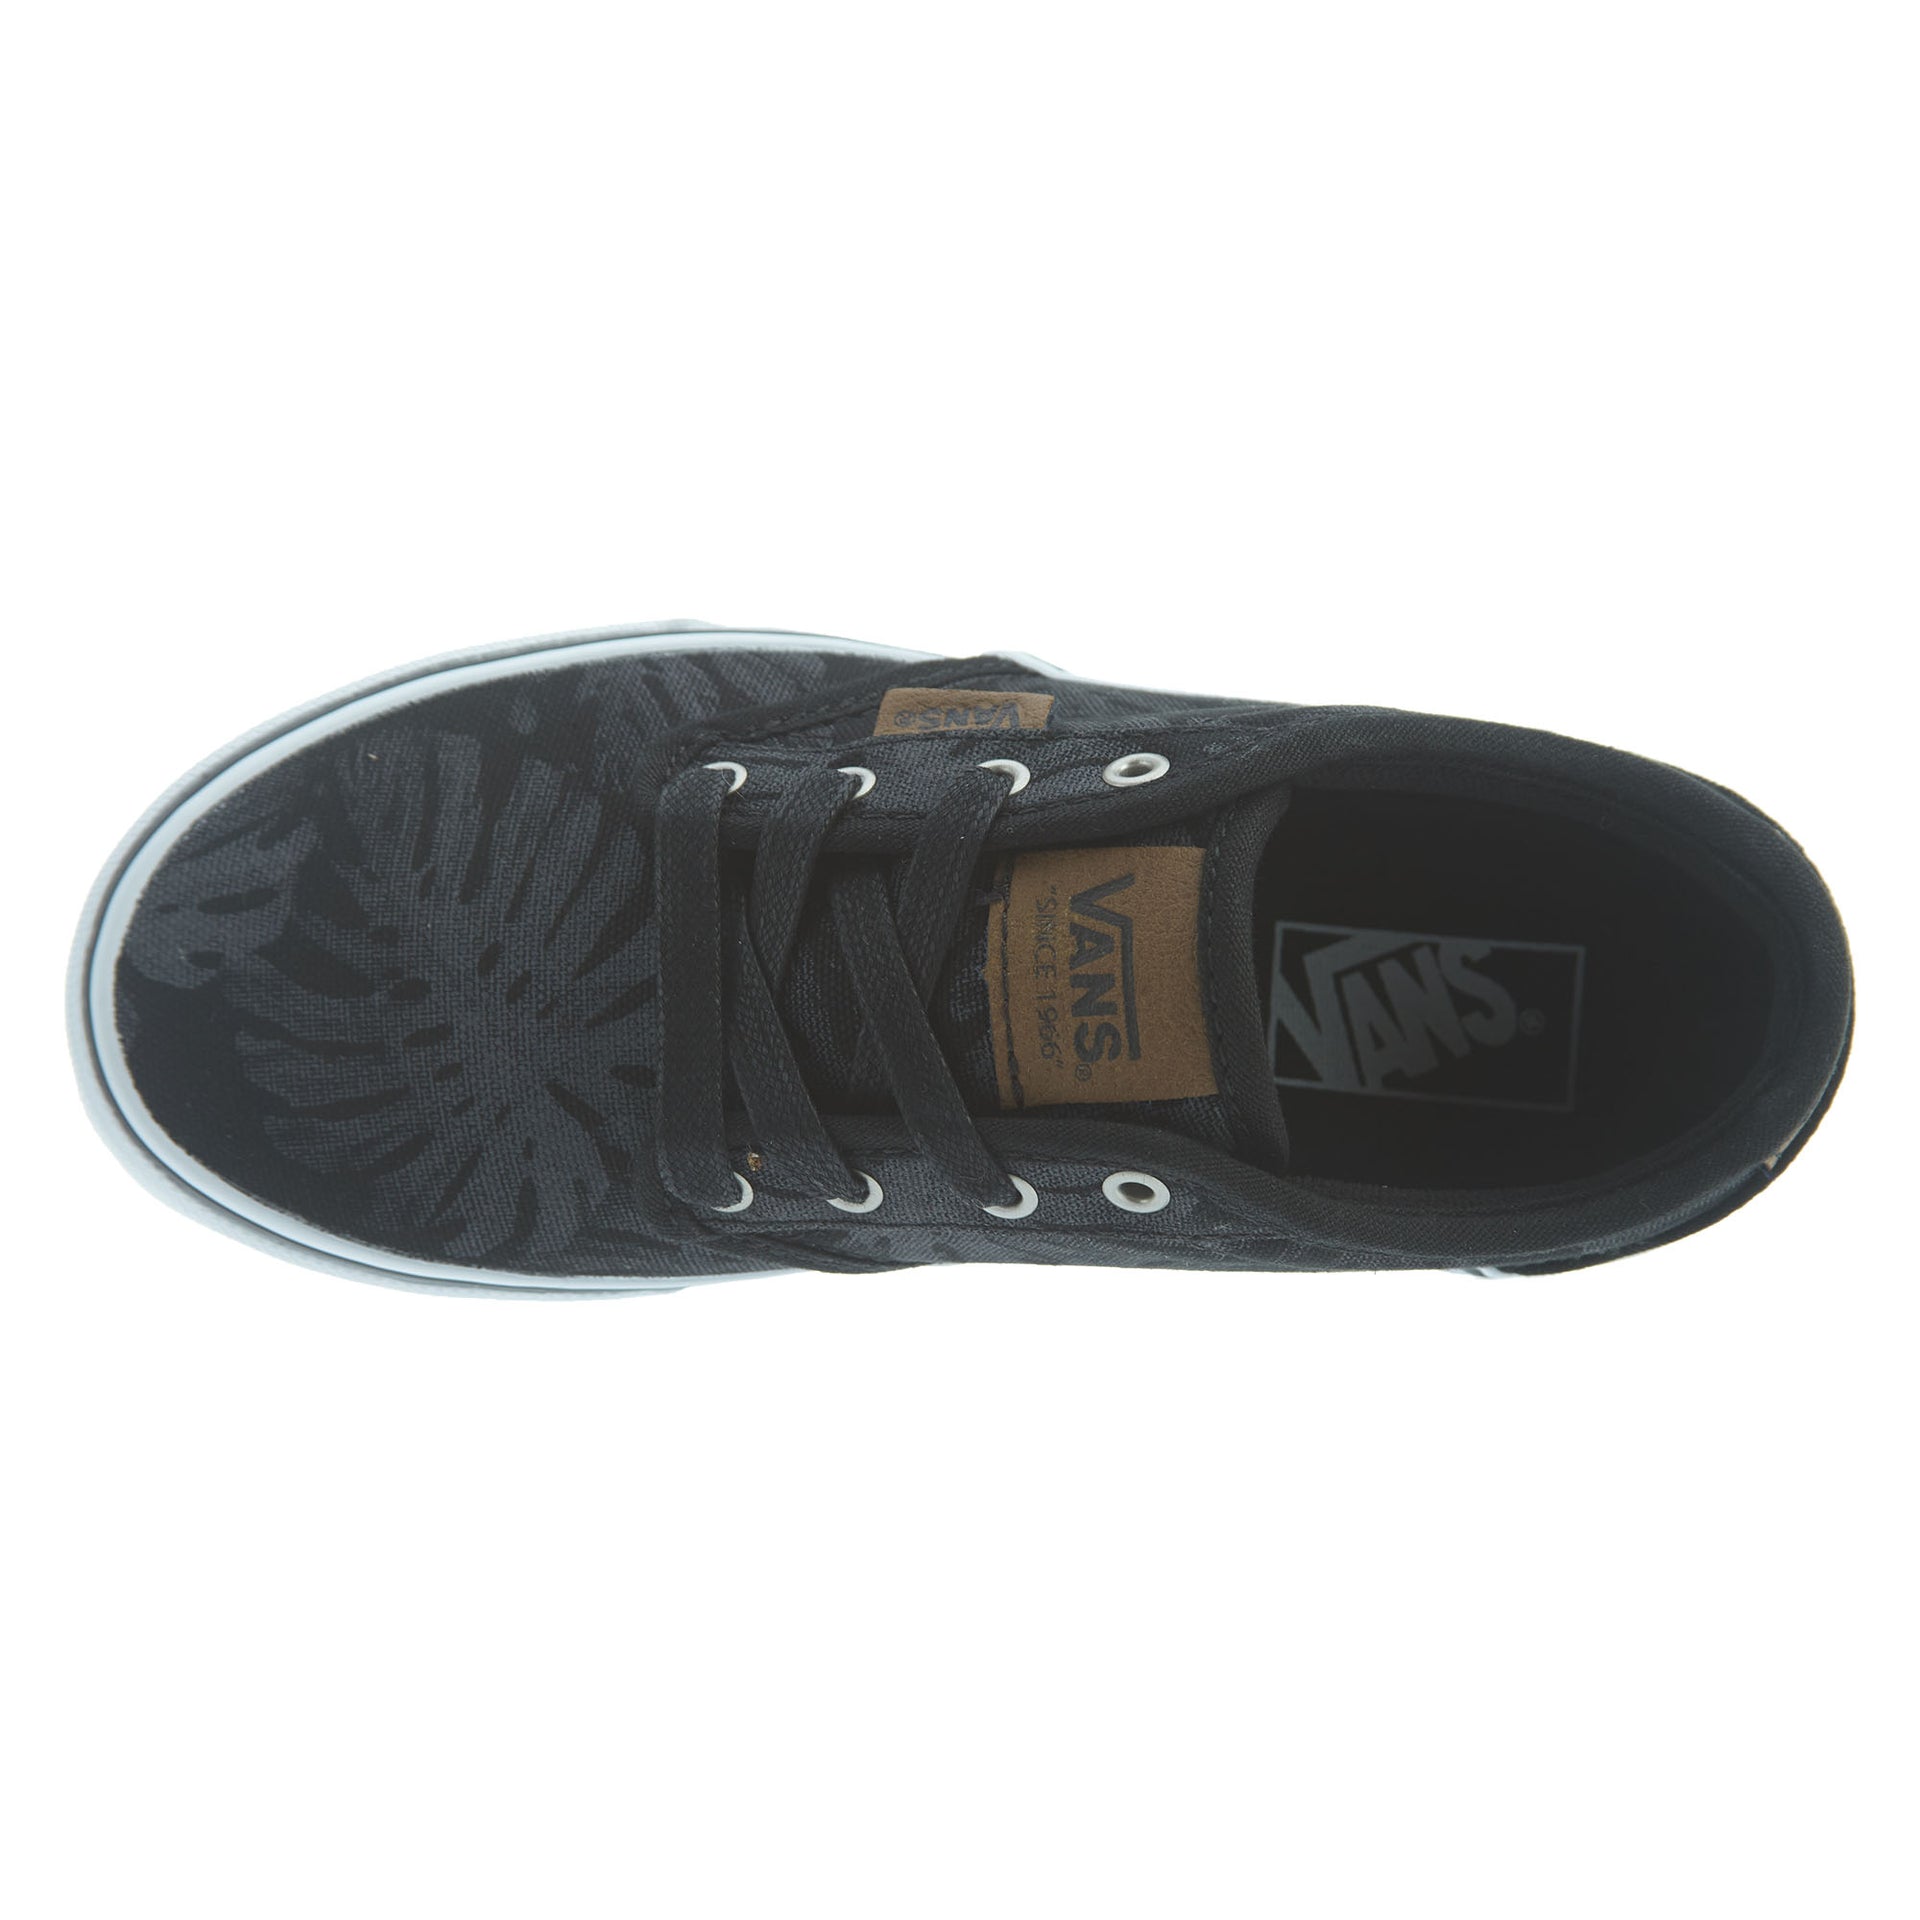 Vans Atwood Deluxe Big Kids Style : Vn000zst-5LB